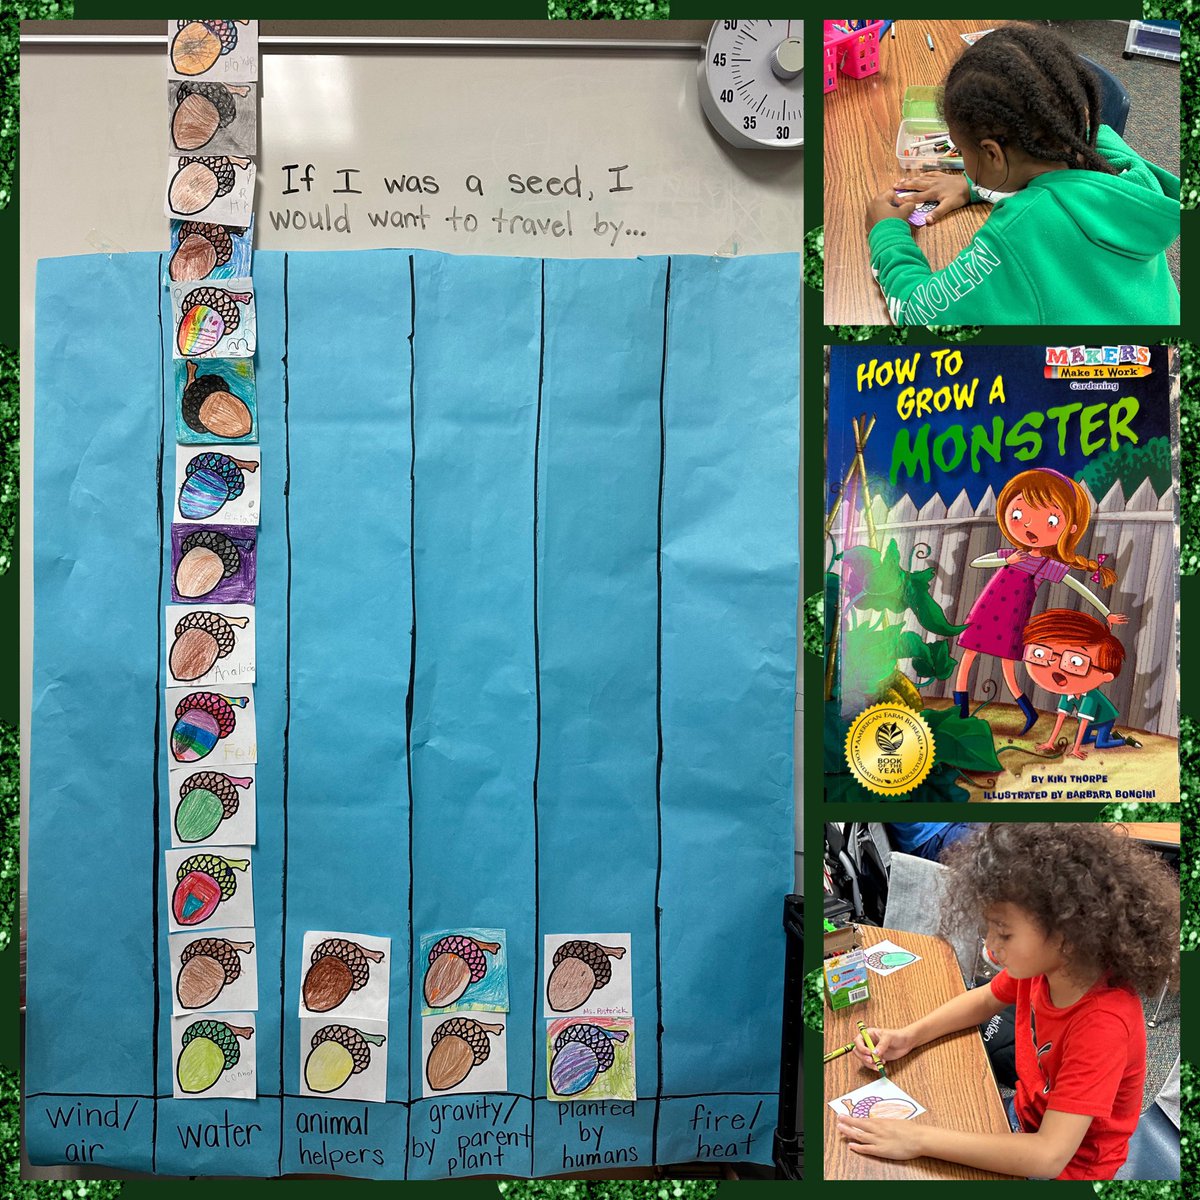 This week we read the book, How to Grow a Monster by Kiki Thorpe. We discussed ways seeds may travel to the space where they will grow. We imagined how we would prefer to travel if we were seeds and graphed our responses. @TexasFarmBureau #ReadAgBooksTX2024